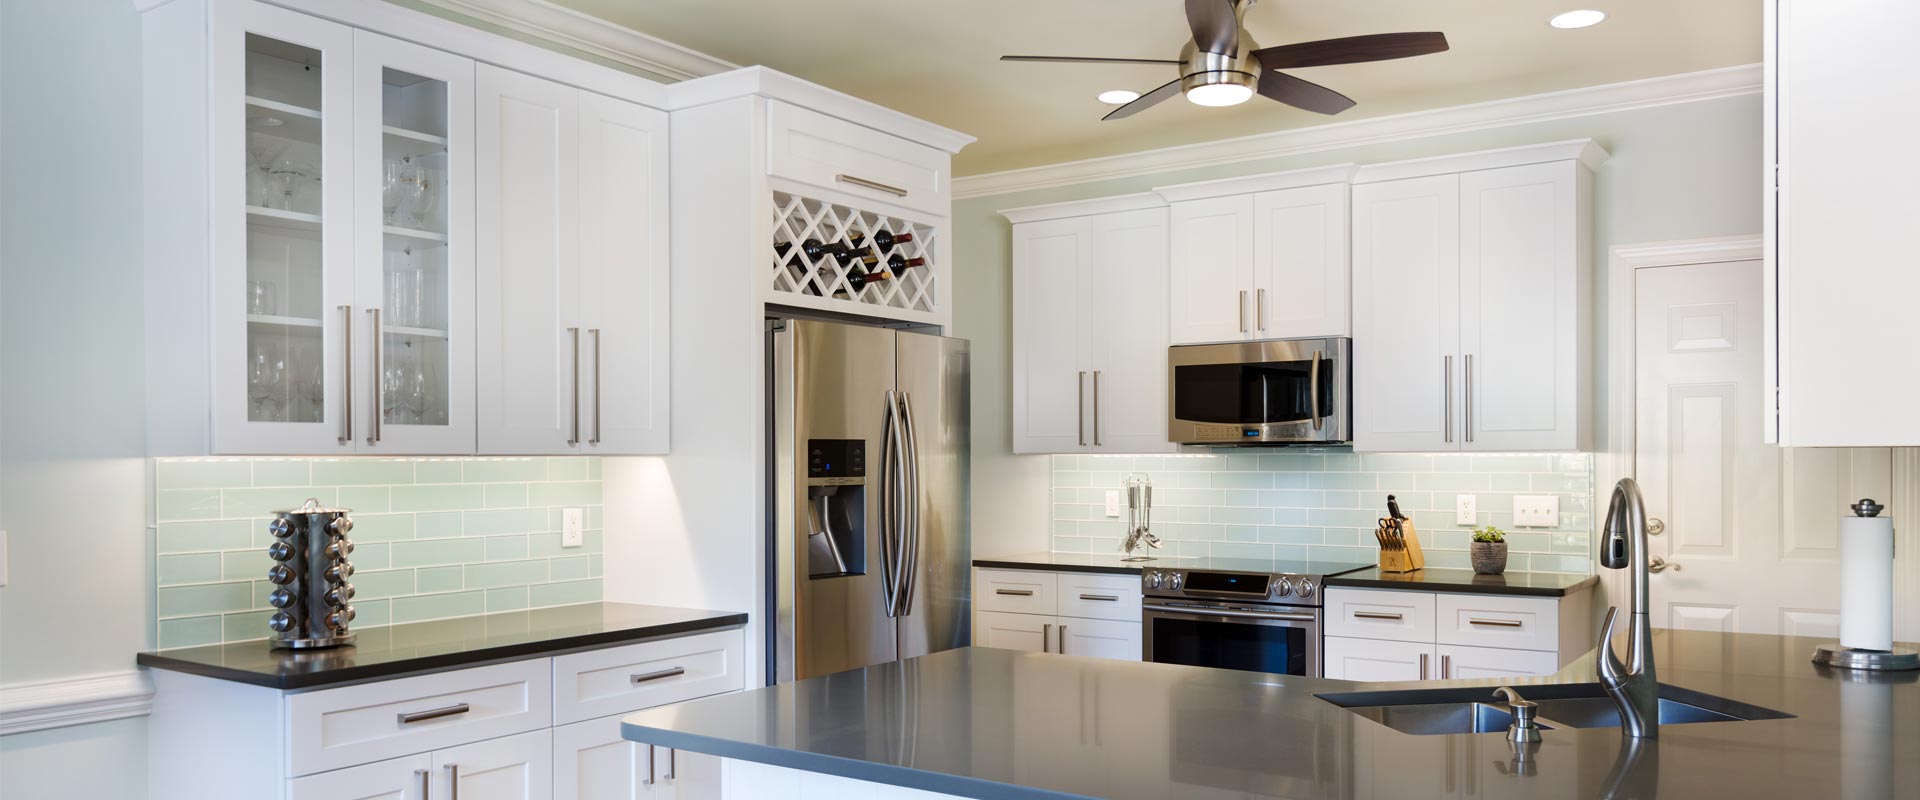 kitchen and bath remodelers wilmington ma